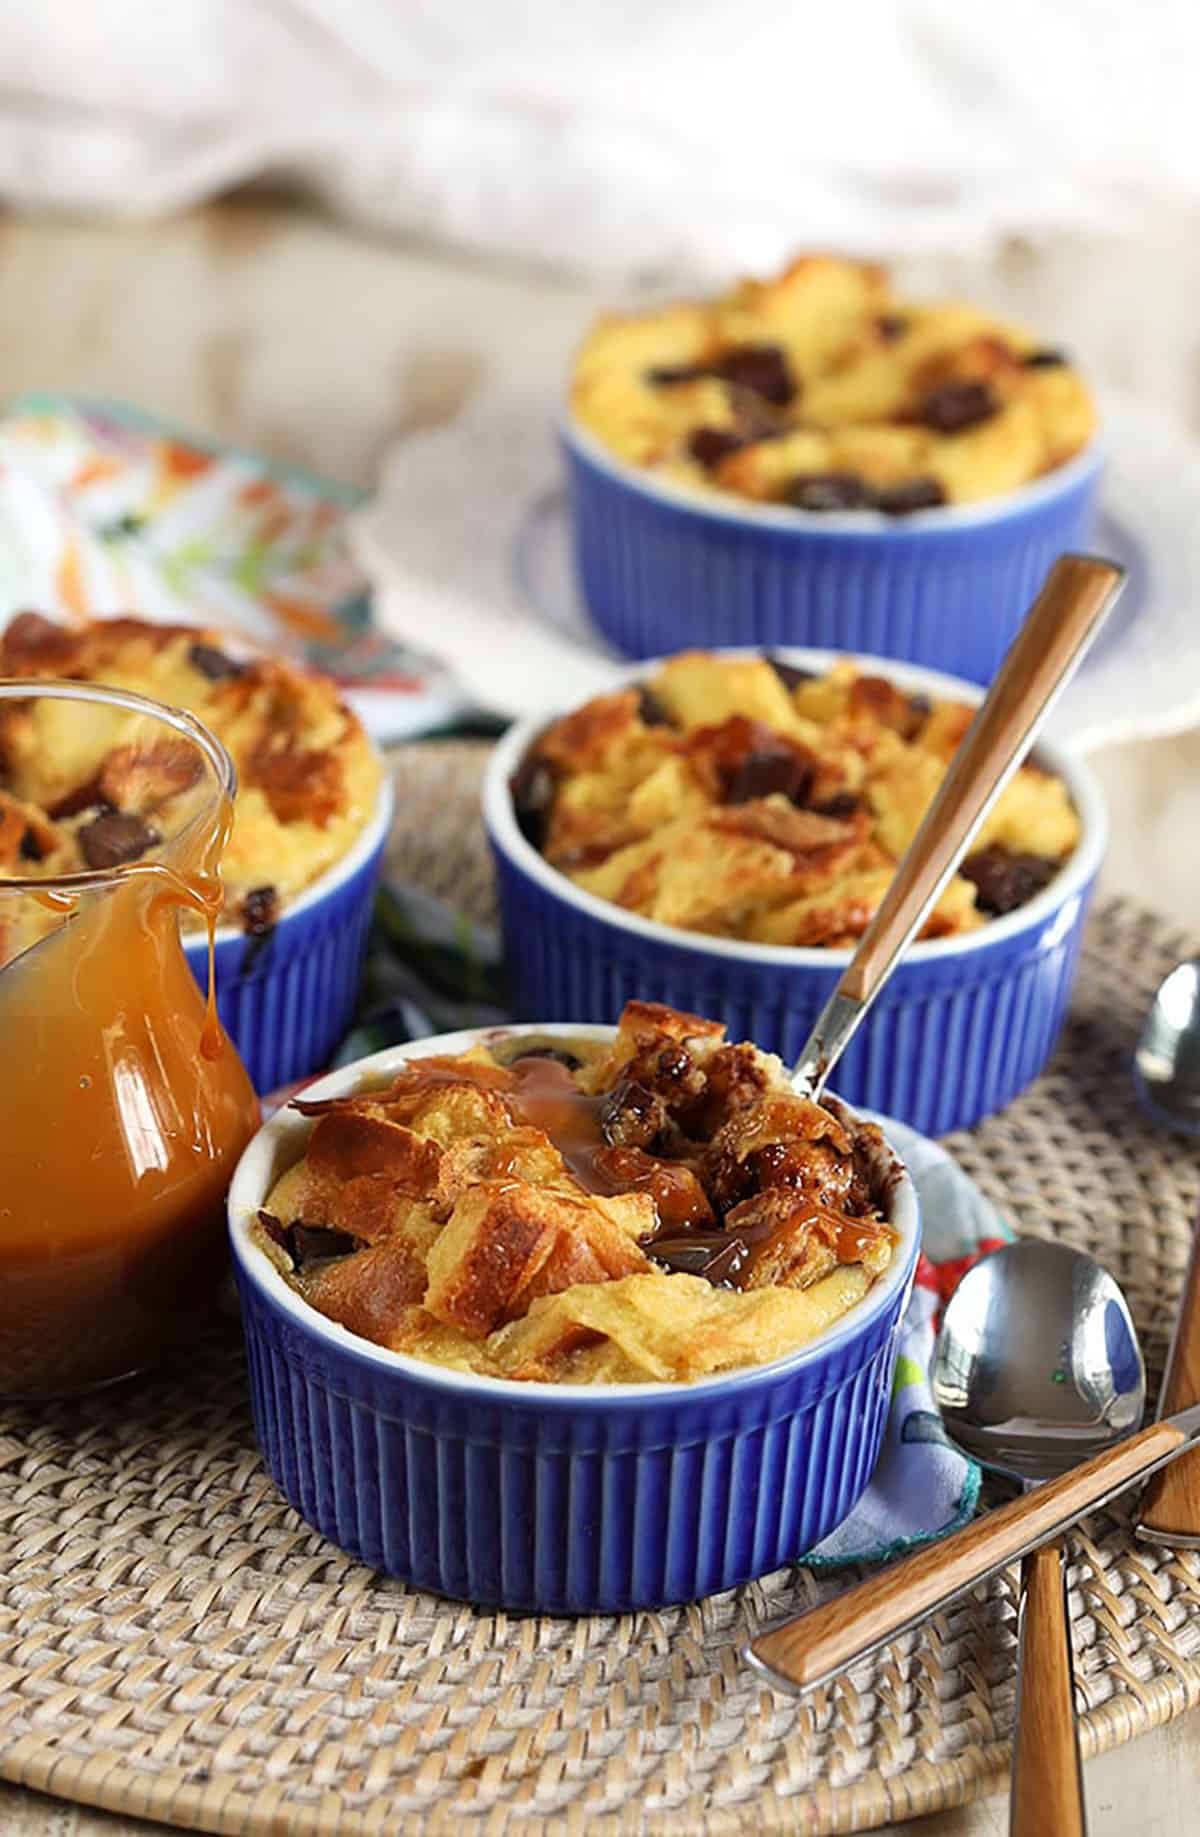 Three blue ramekins with bread pudding in them and a wood spoon sticking out of the front bread pudding dish.